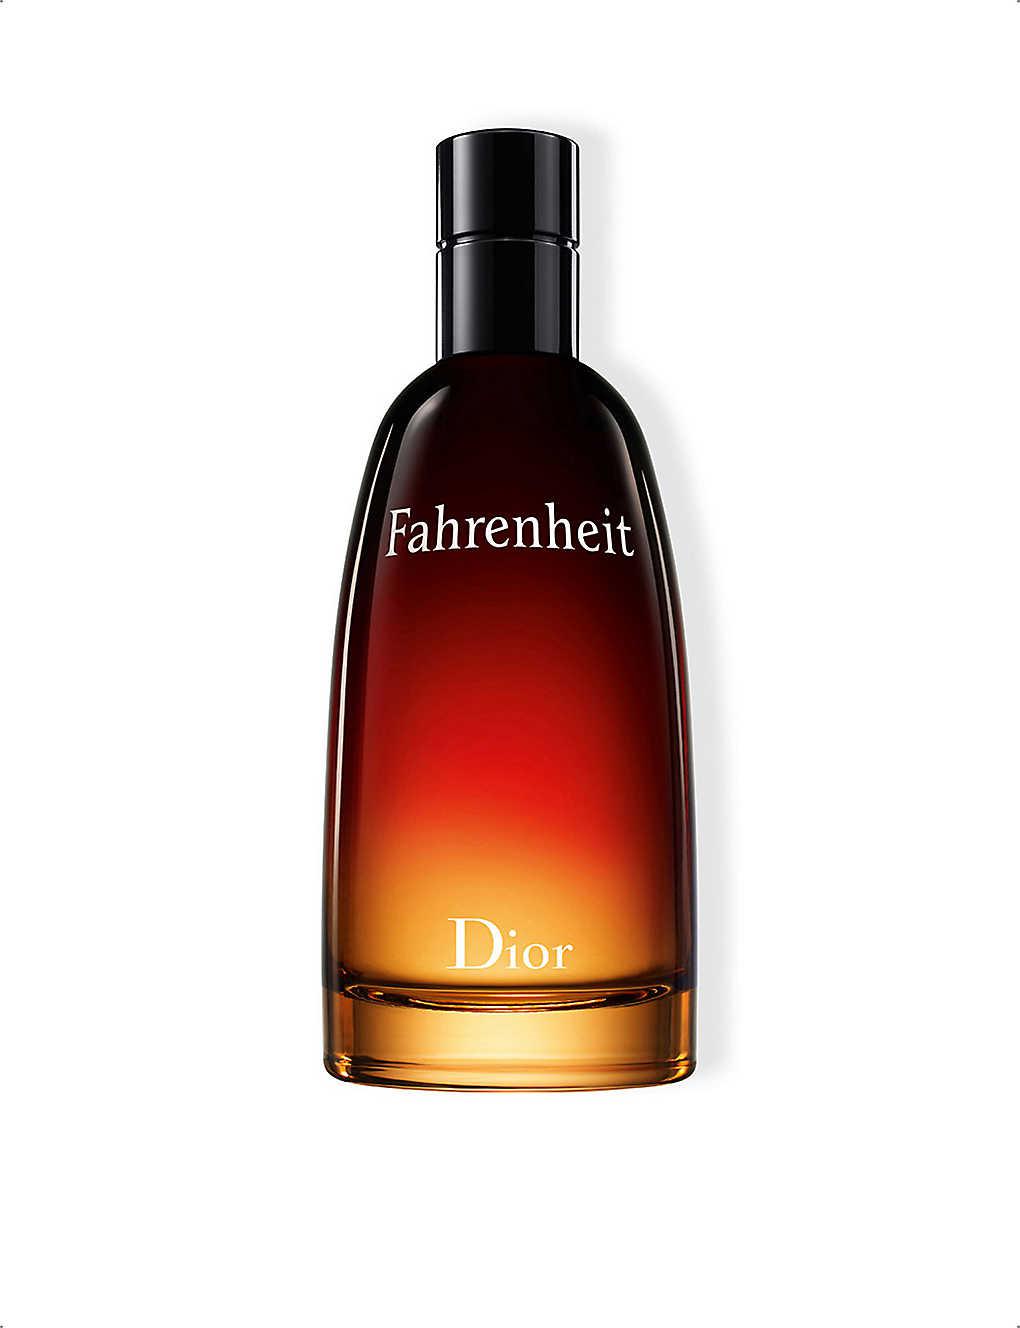 DIOR Fahrenheit Aftershave Lotion Bottle 100ml